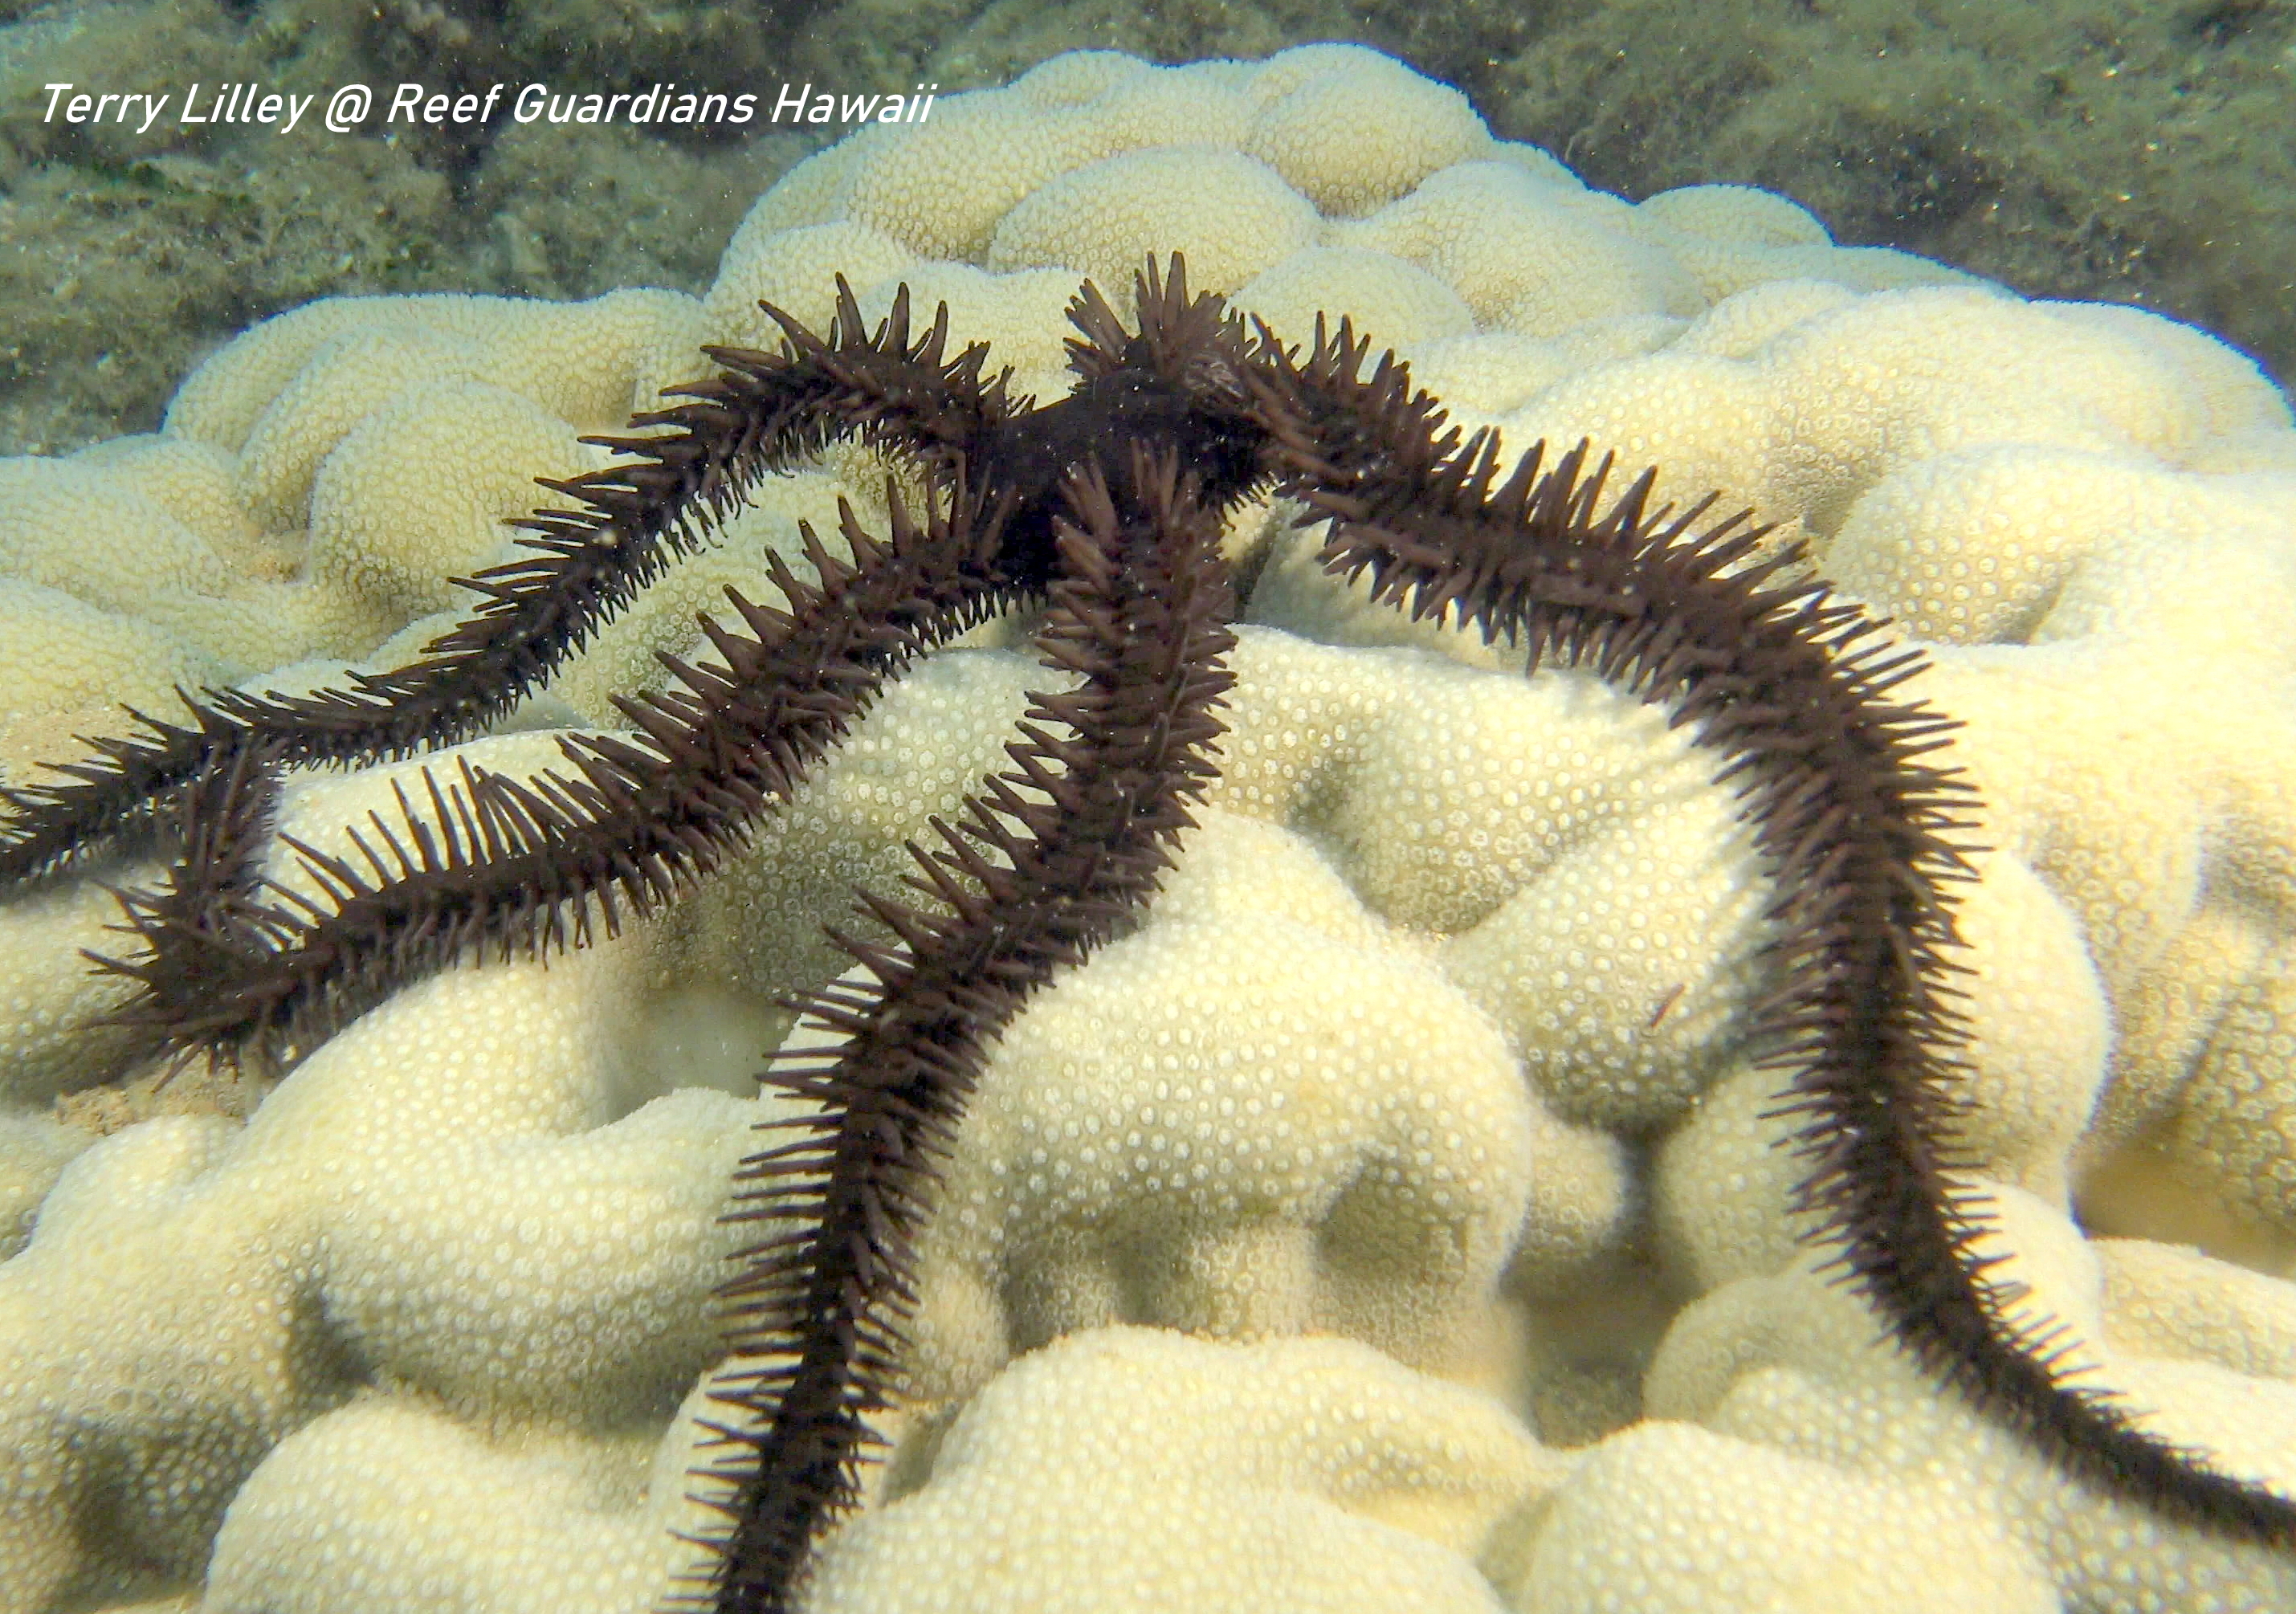 Spiny Brittle Star